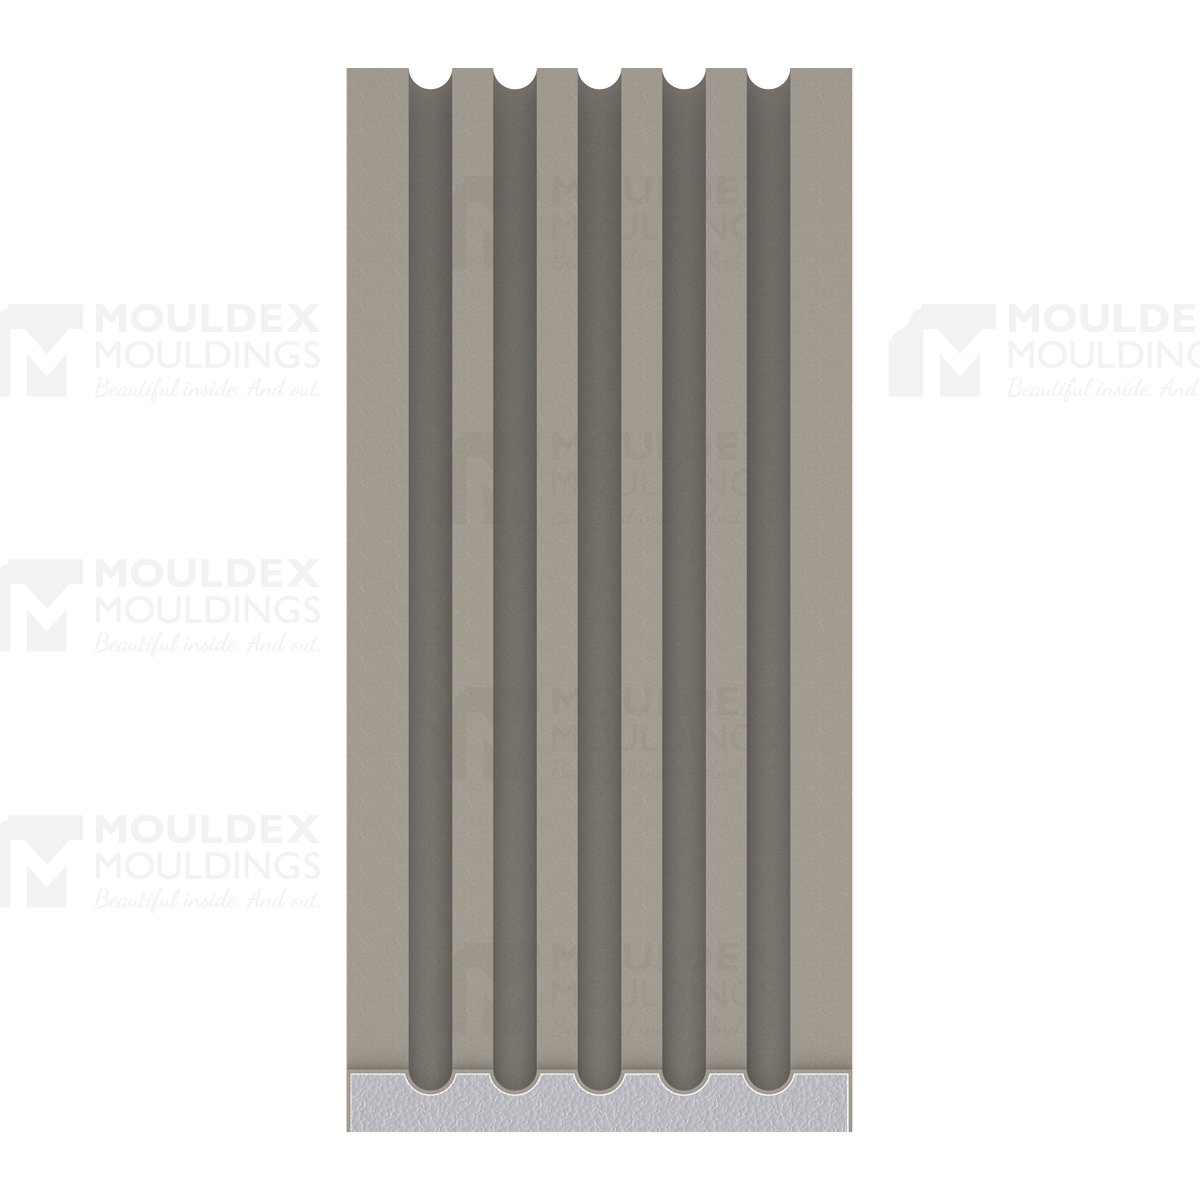 The Flute 6 Composite Exterior Fluted Pilaster